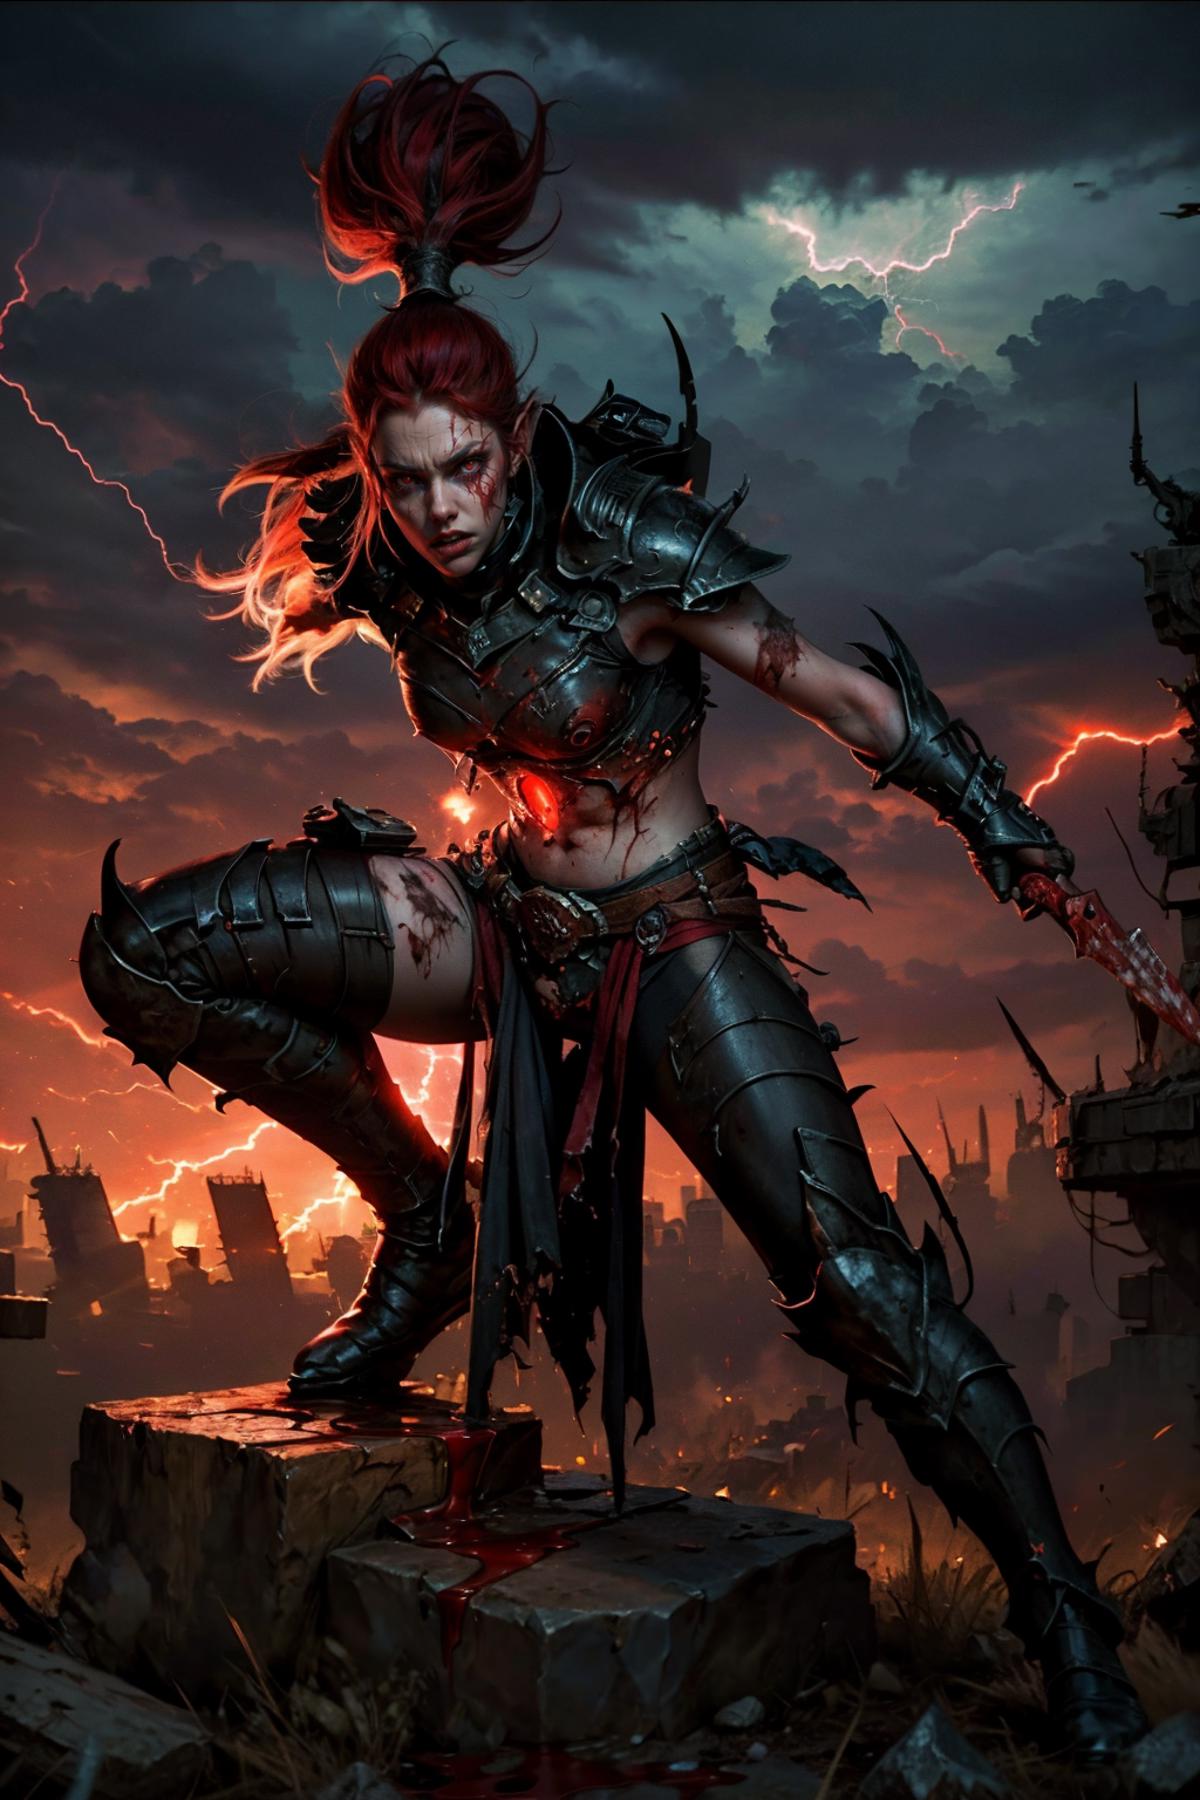 A warrior woman with red hair and a sword in a fantasy setting.